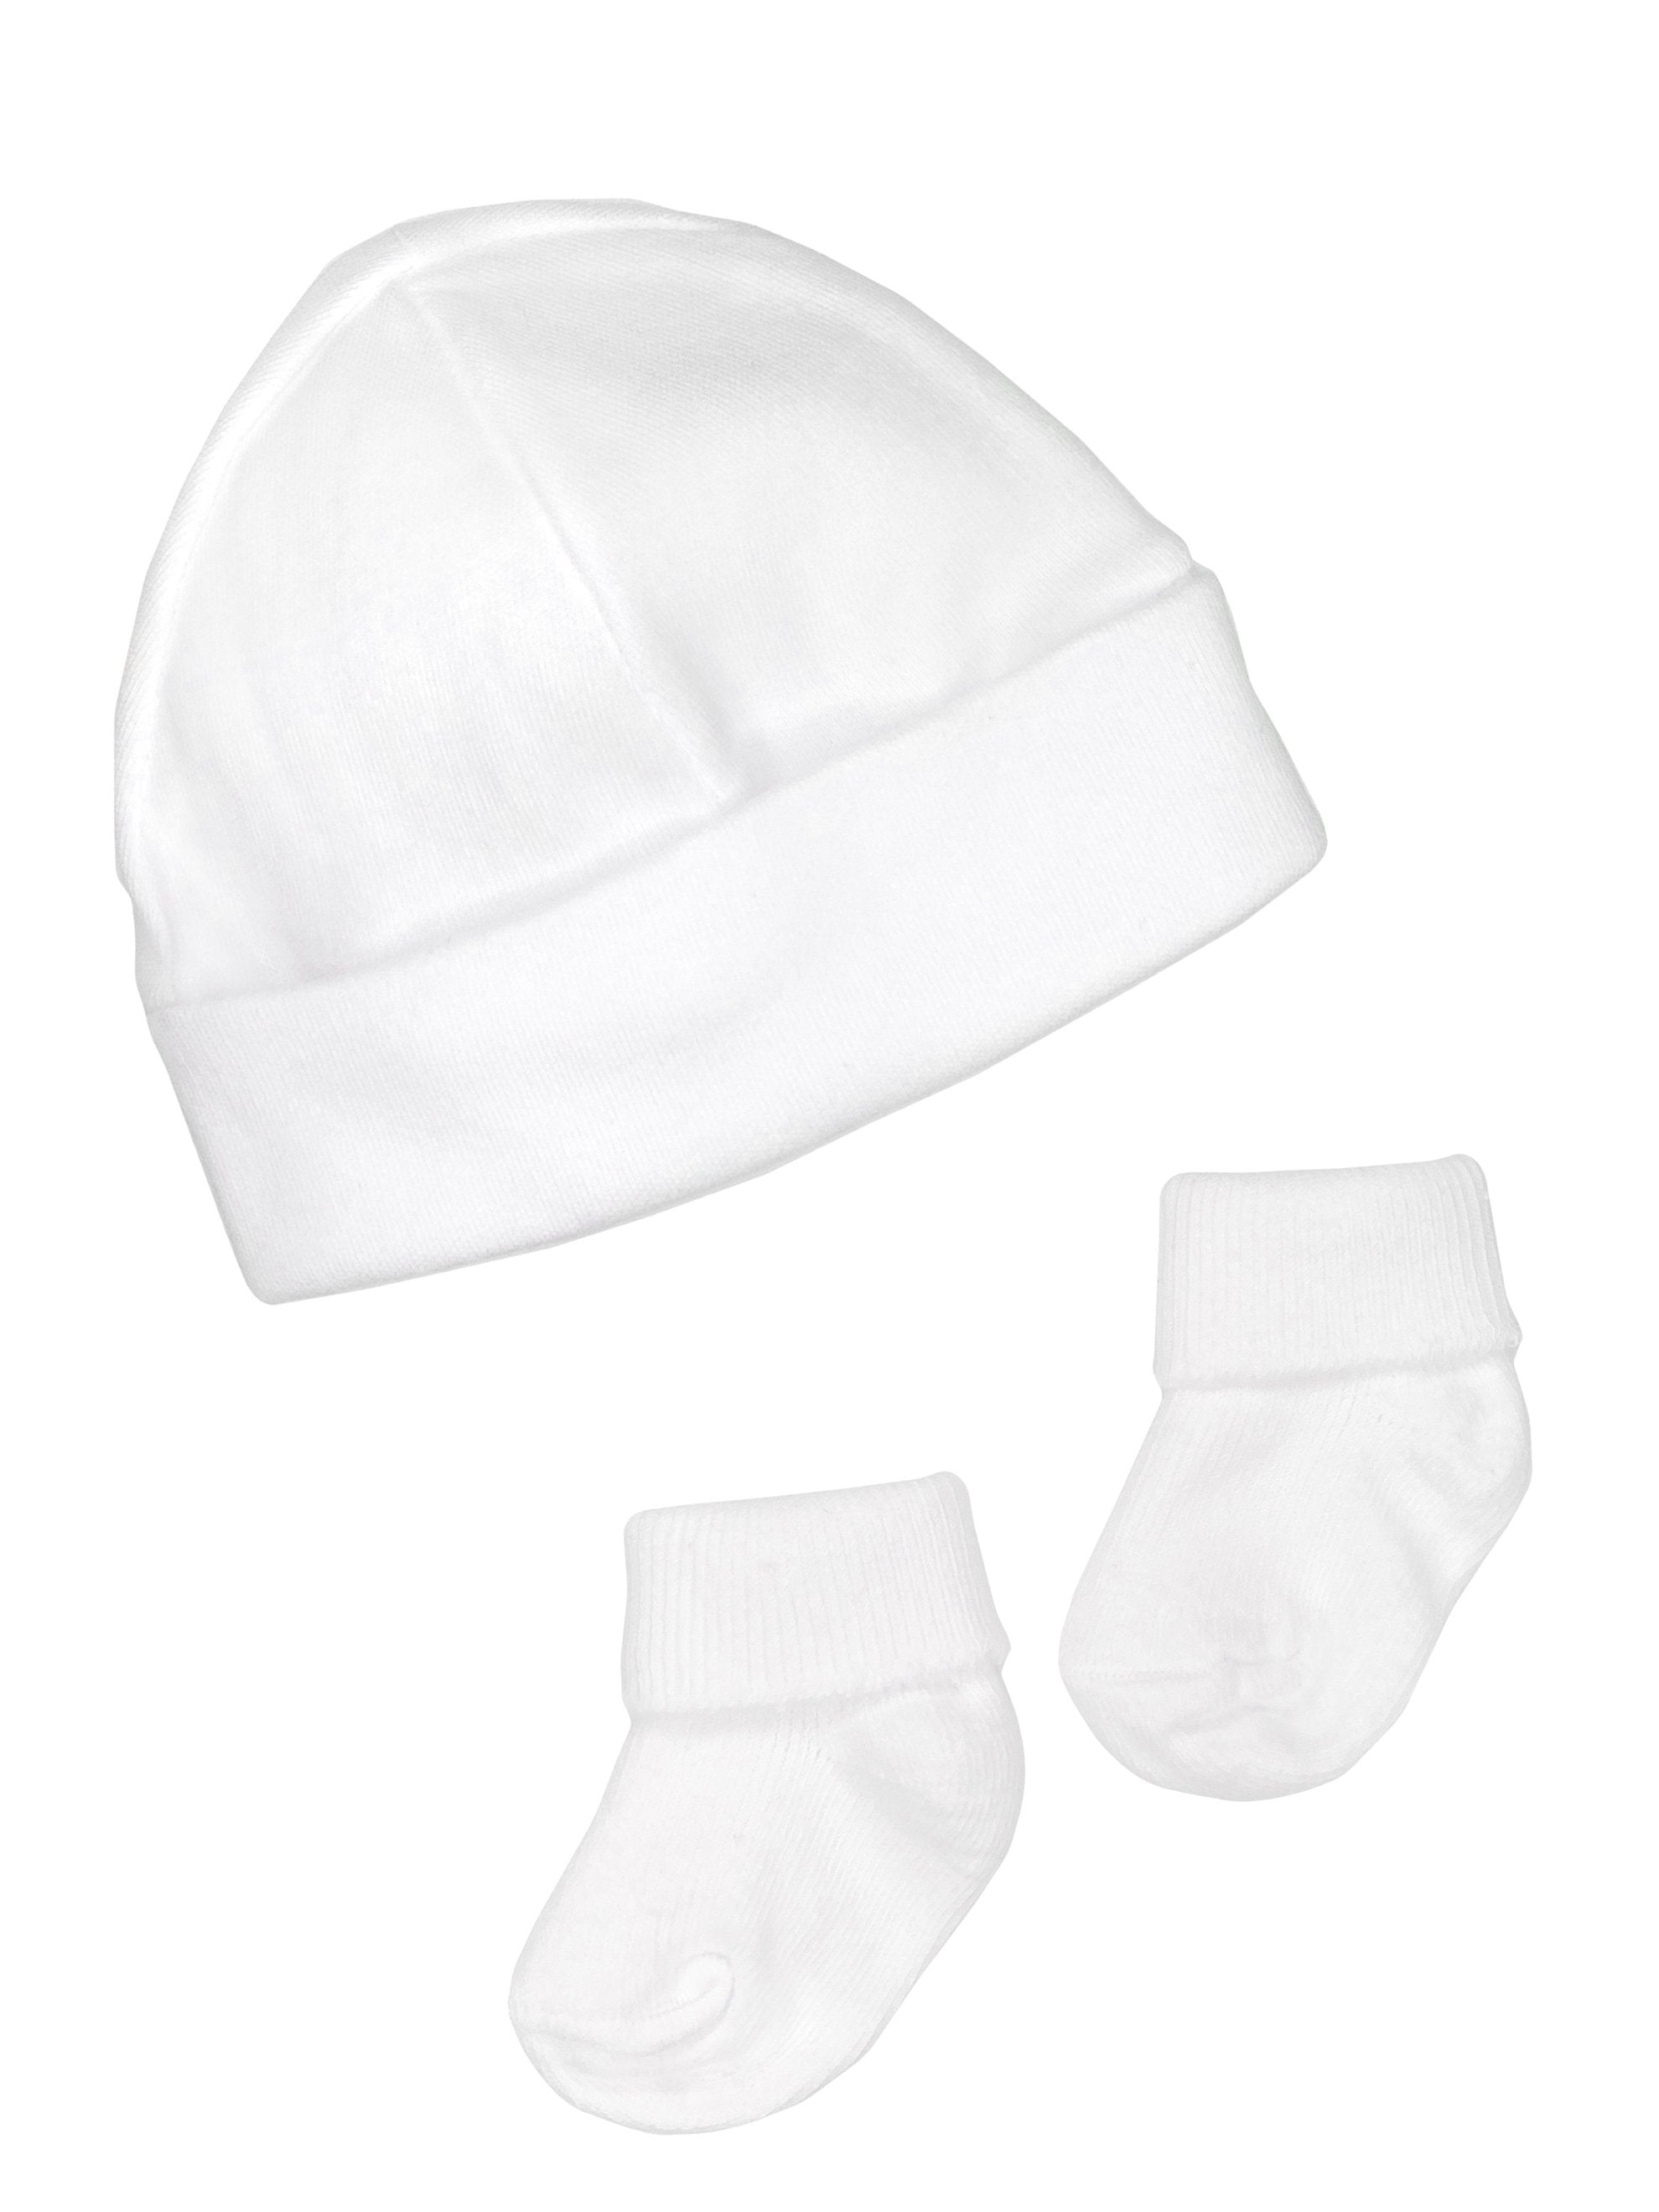 Premature Baby Hat and Socks Set - White - Hat, Mitts & Booties Set - Little Mouse Baby Clothing & Gifts